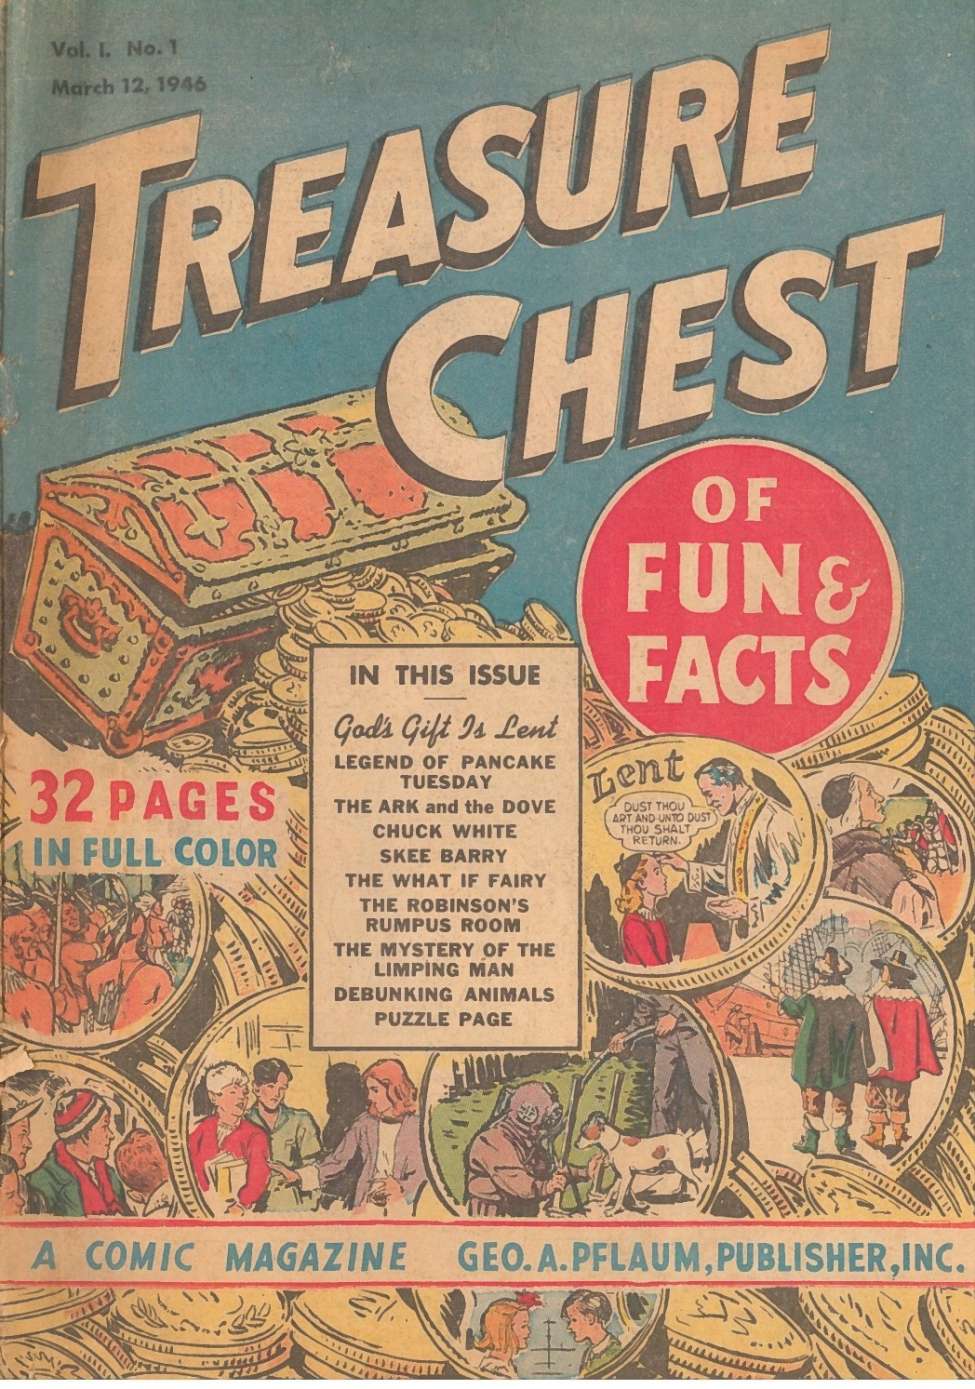 Book Cover For Treasure Chest of Fun and Fact v1 1